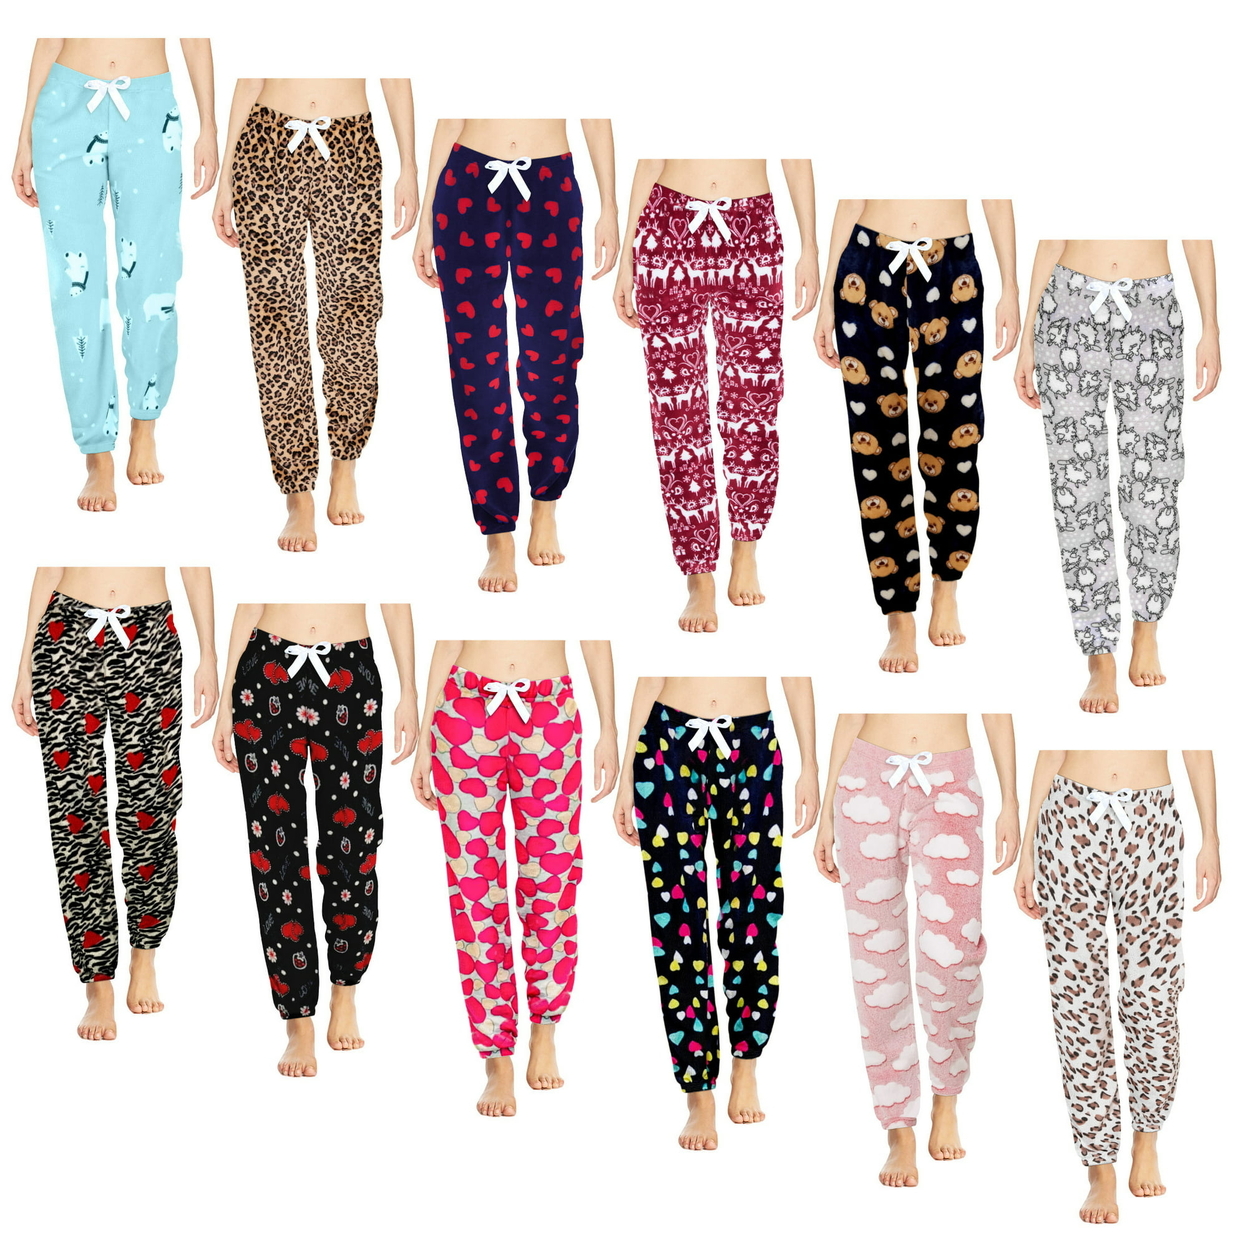 Multi-Pack: Women's Printed Ultra-Soft Comfy Stretch Micro-Fleece Pajama Lounge Pants - 1-pack, Shapes, Xx-large